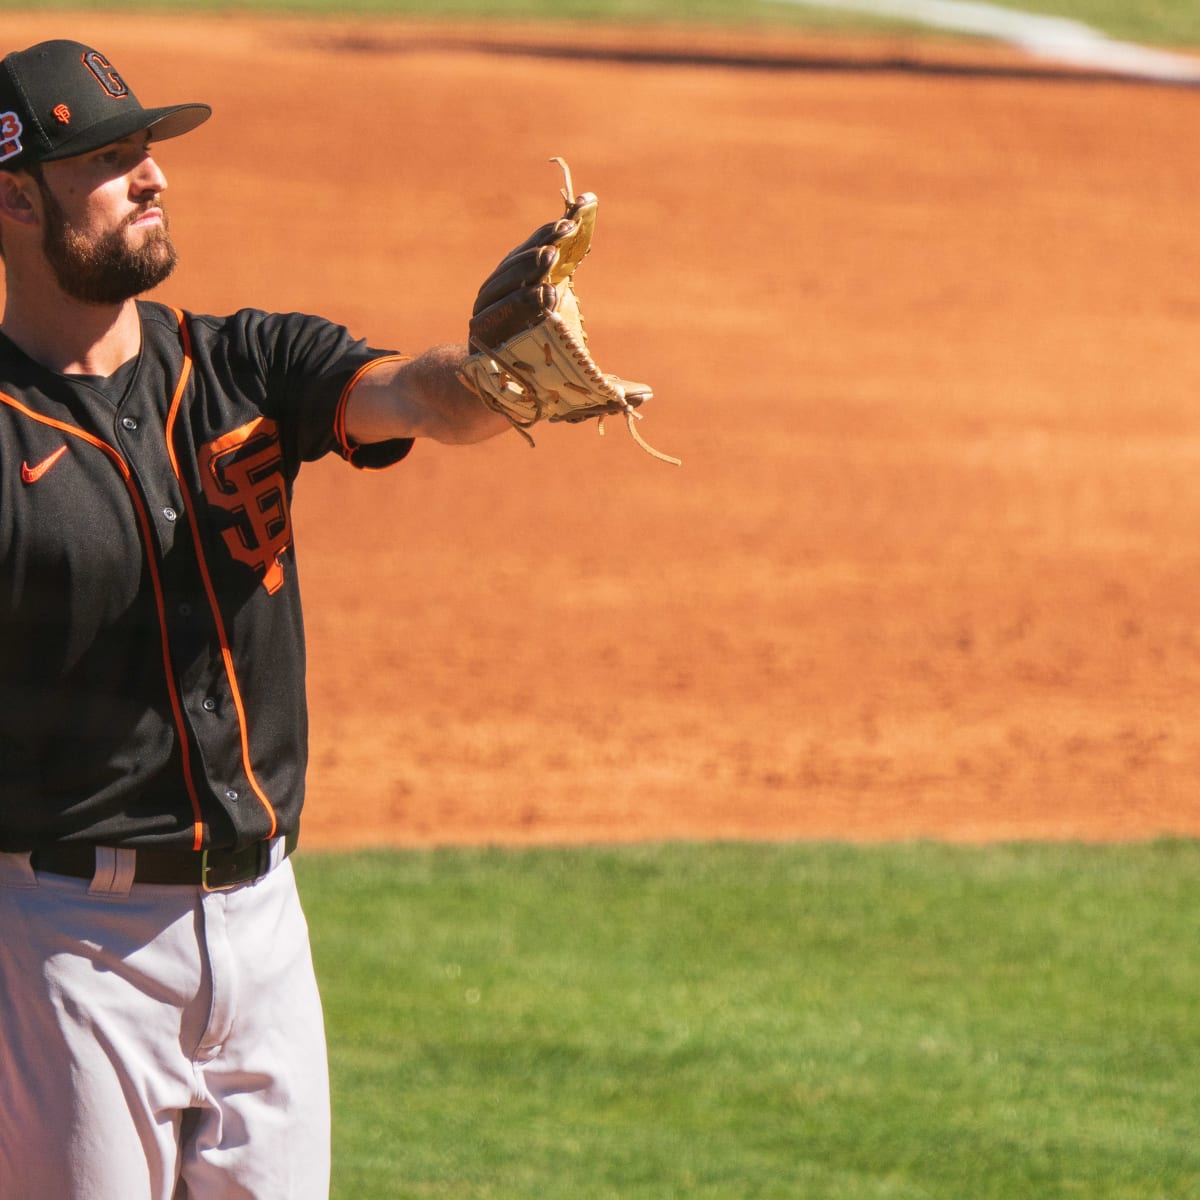 SF Giants News: Alex Wood thinks Bonds should be in the Hall of